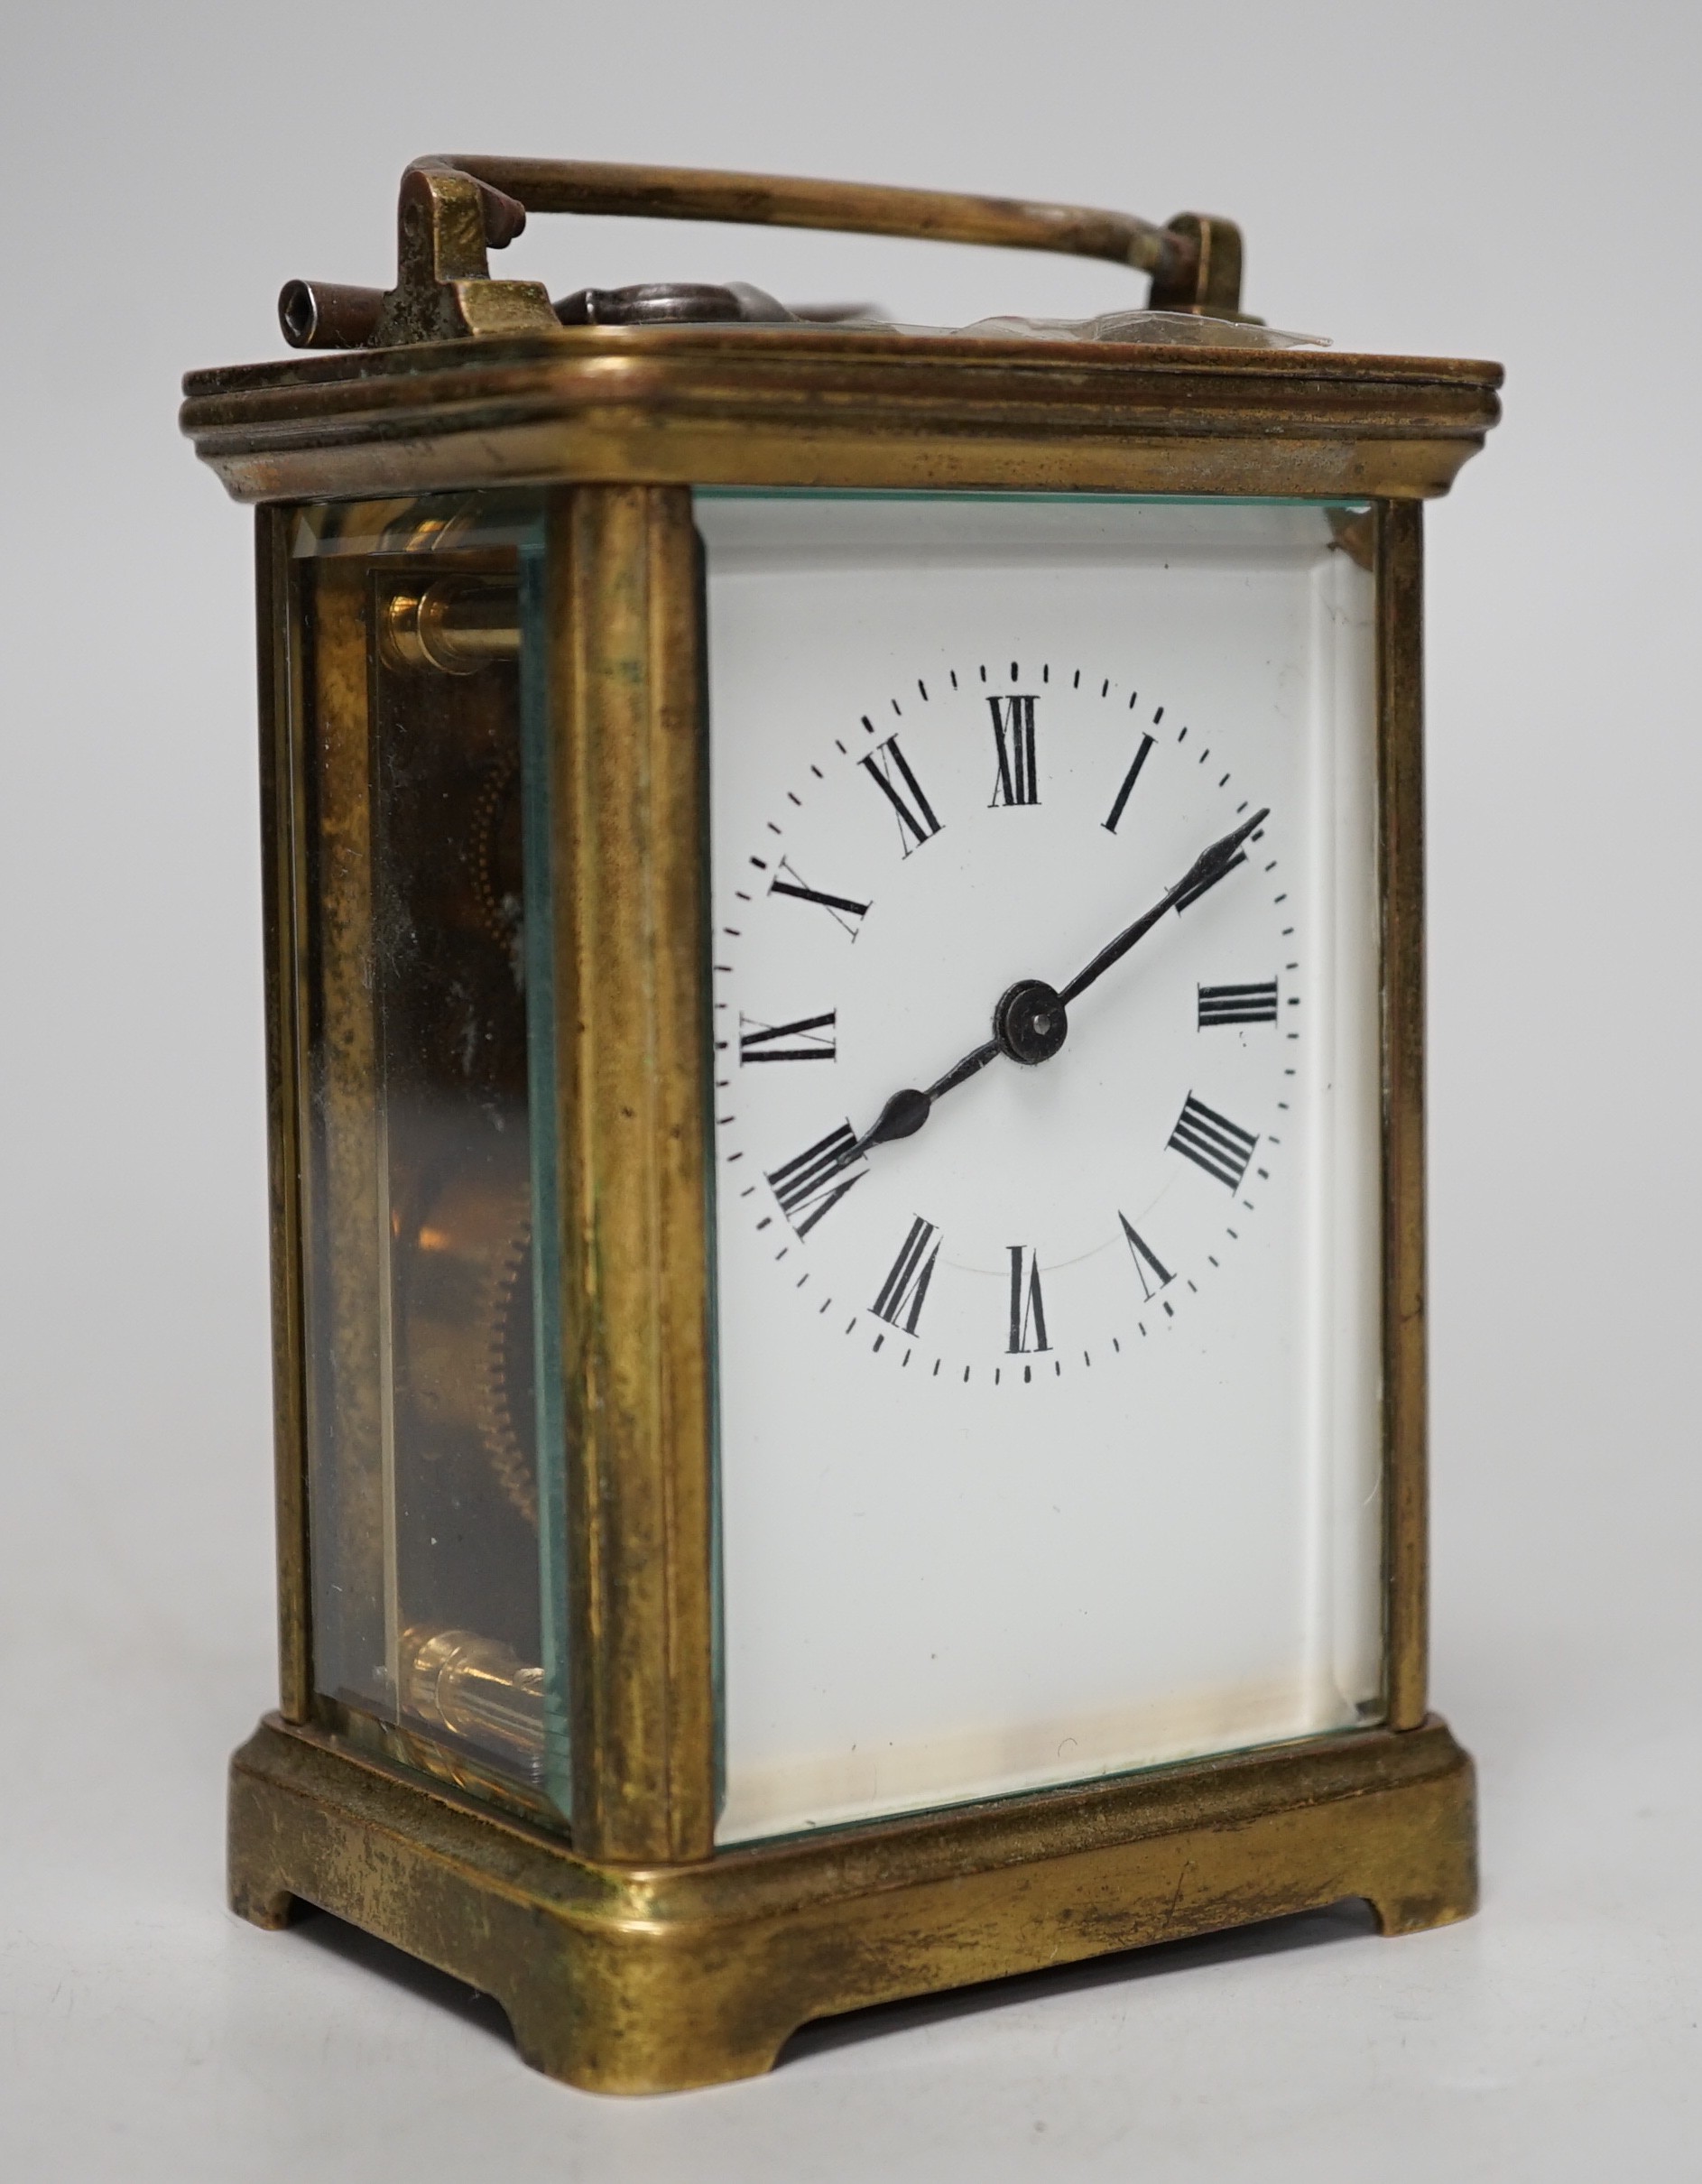 A 19th century brass carriage timepiece with black Roman numerals and second markers over a white